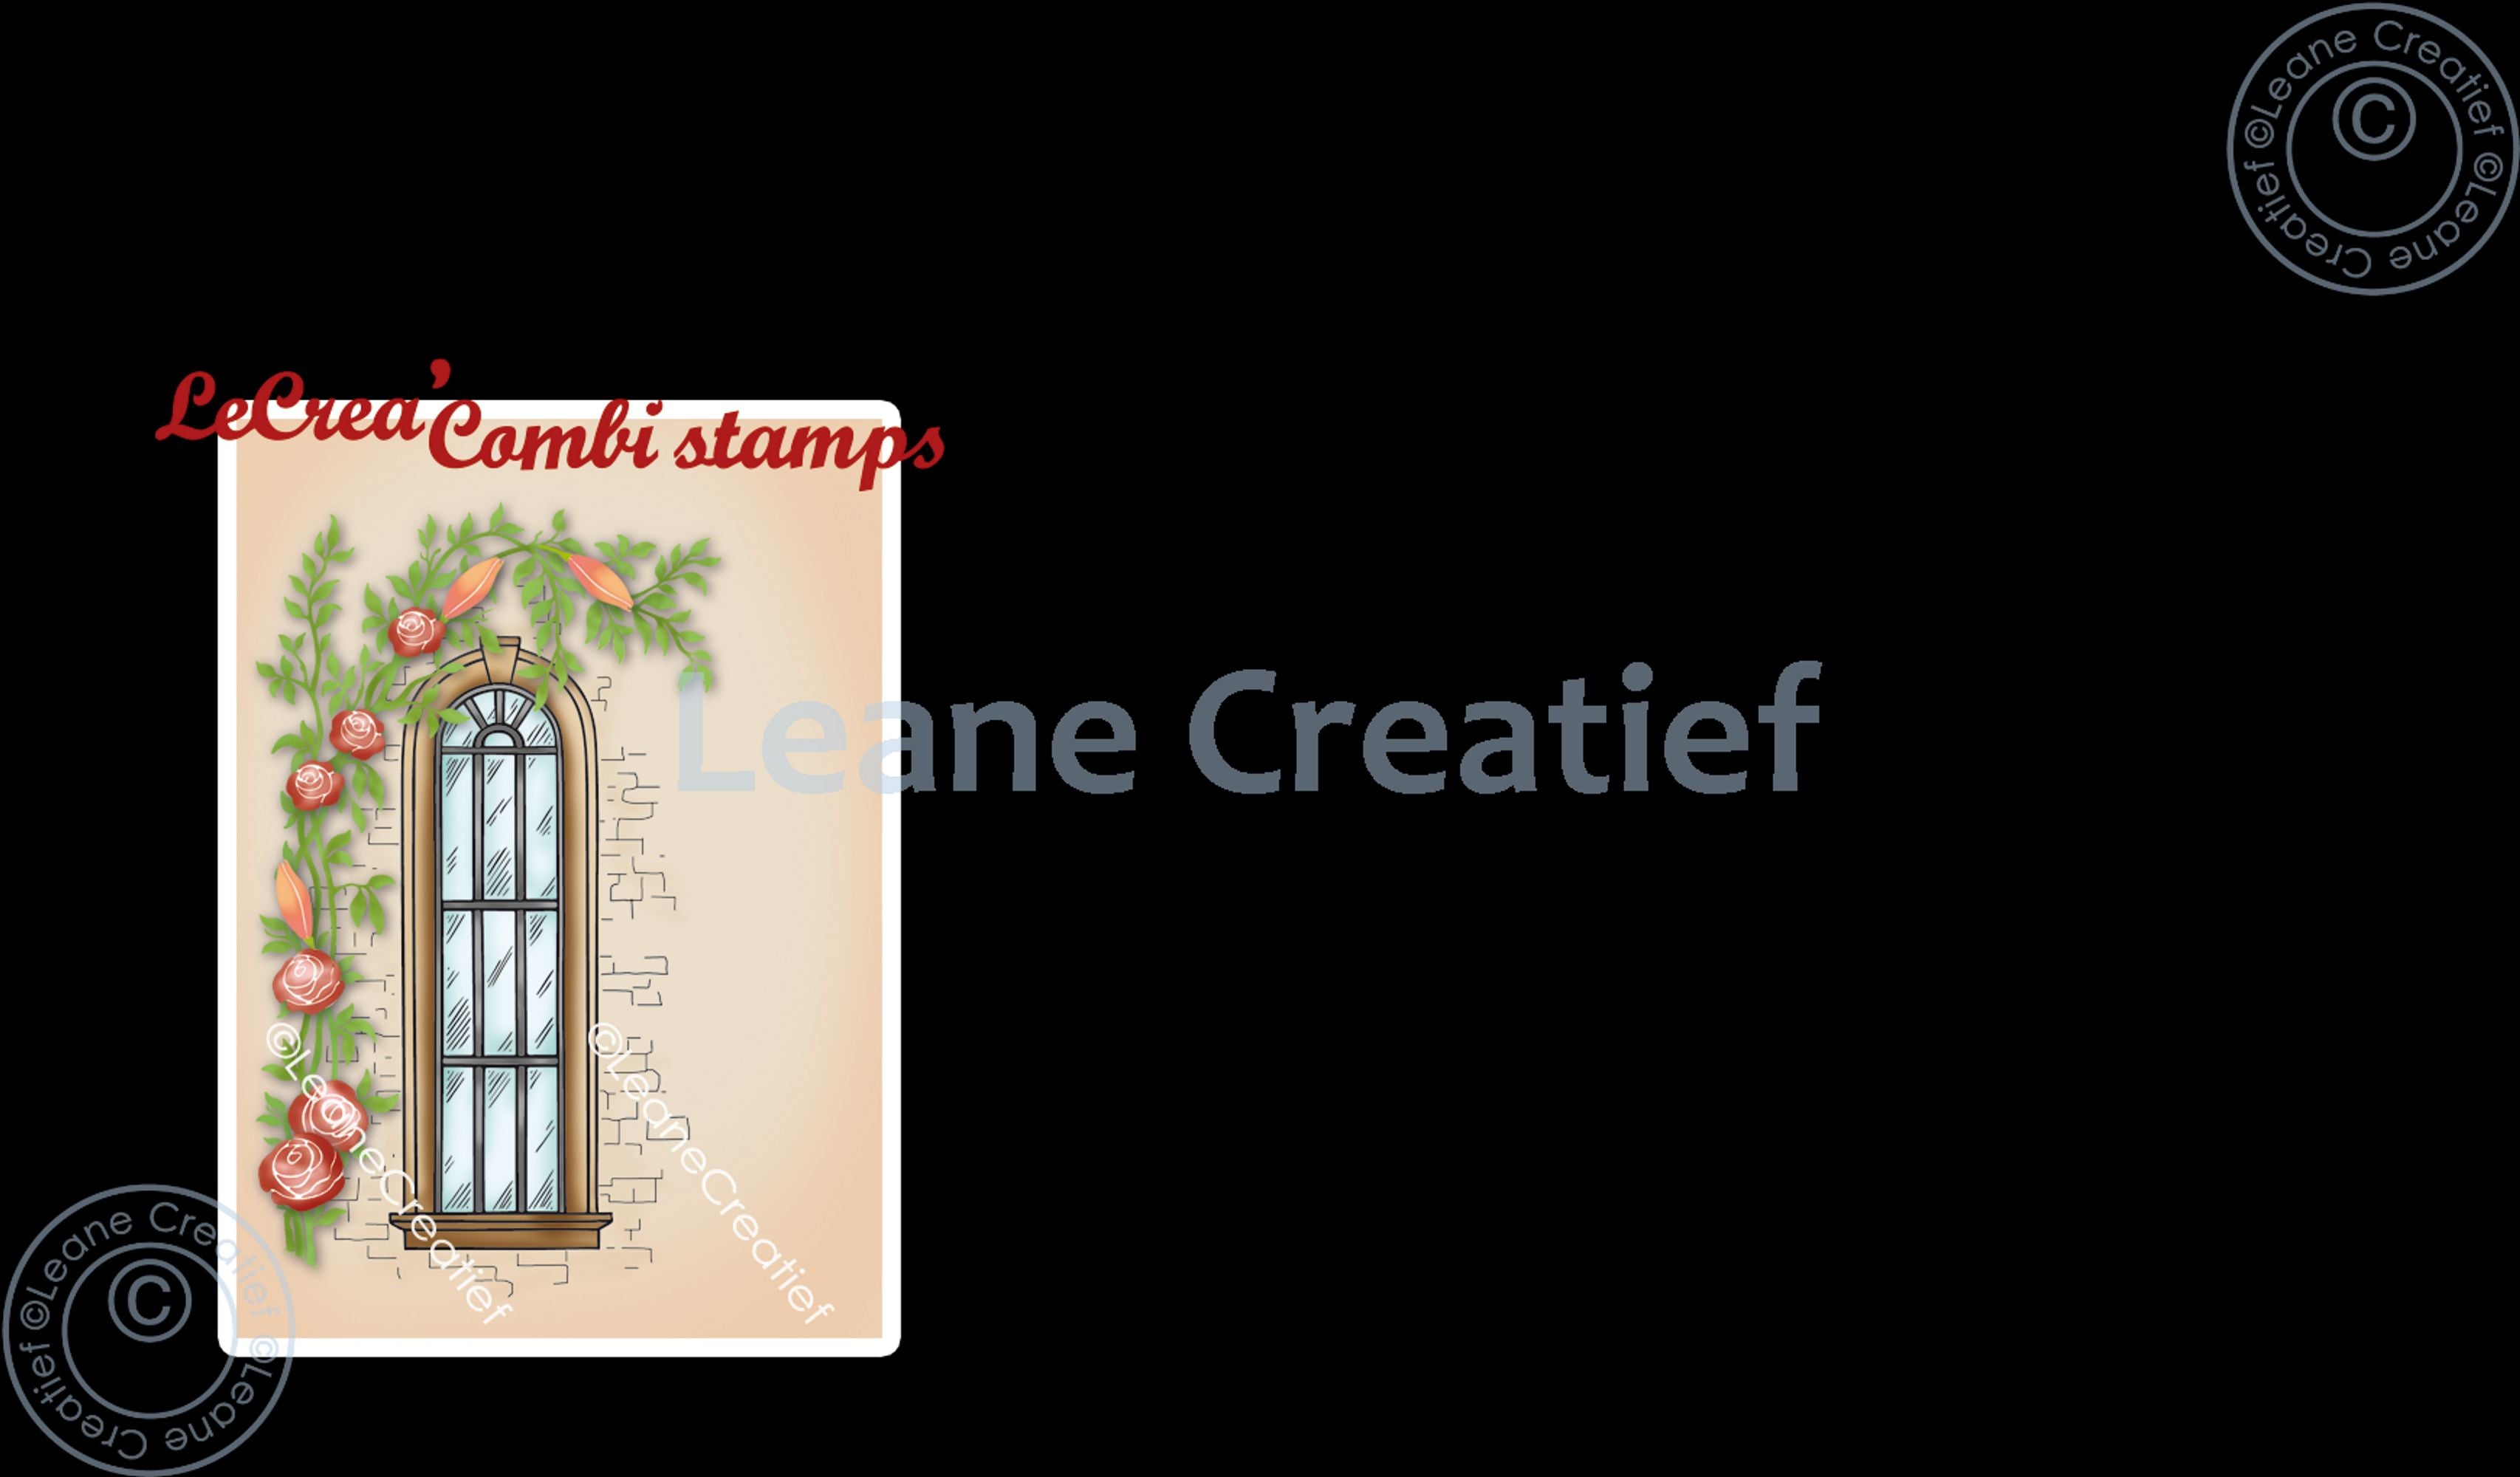 Lecreadesign Combi Clear Stamp Window With Climbing Plant